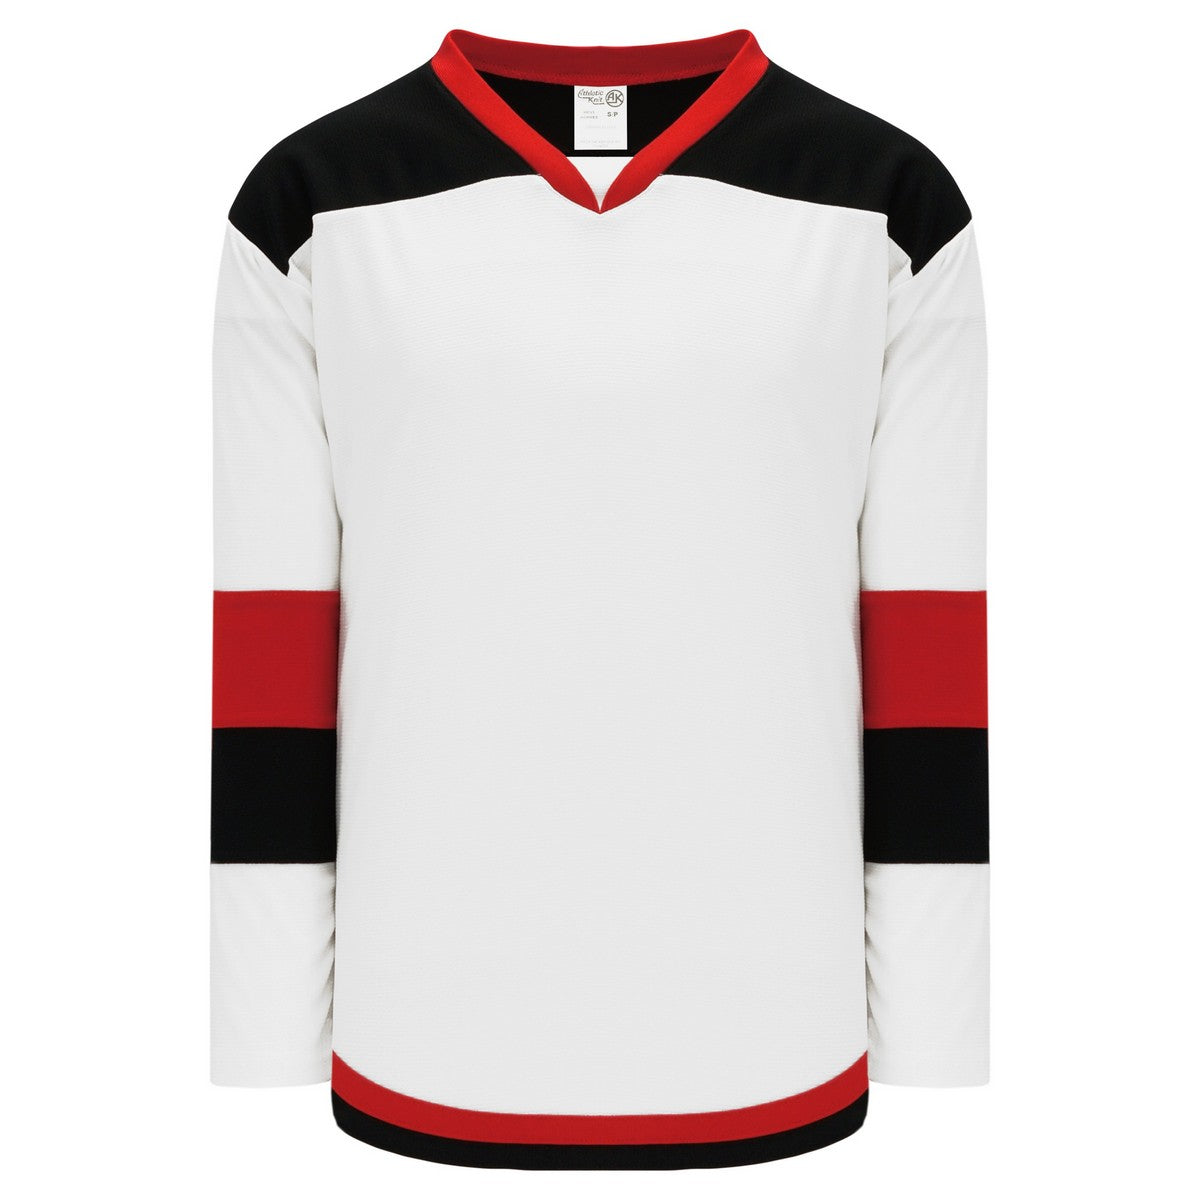 Select Series H7400 Jersey White-Red